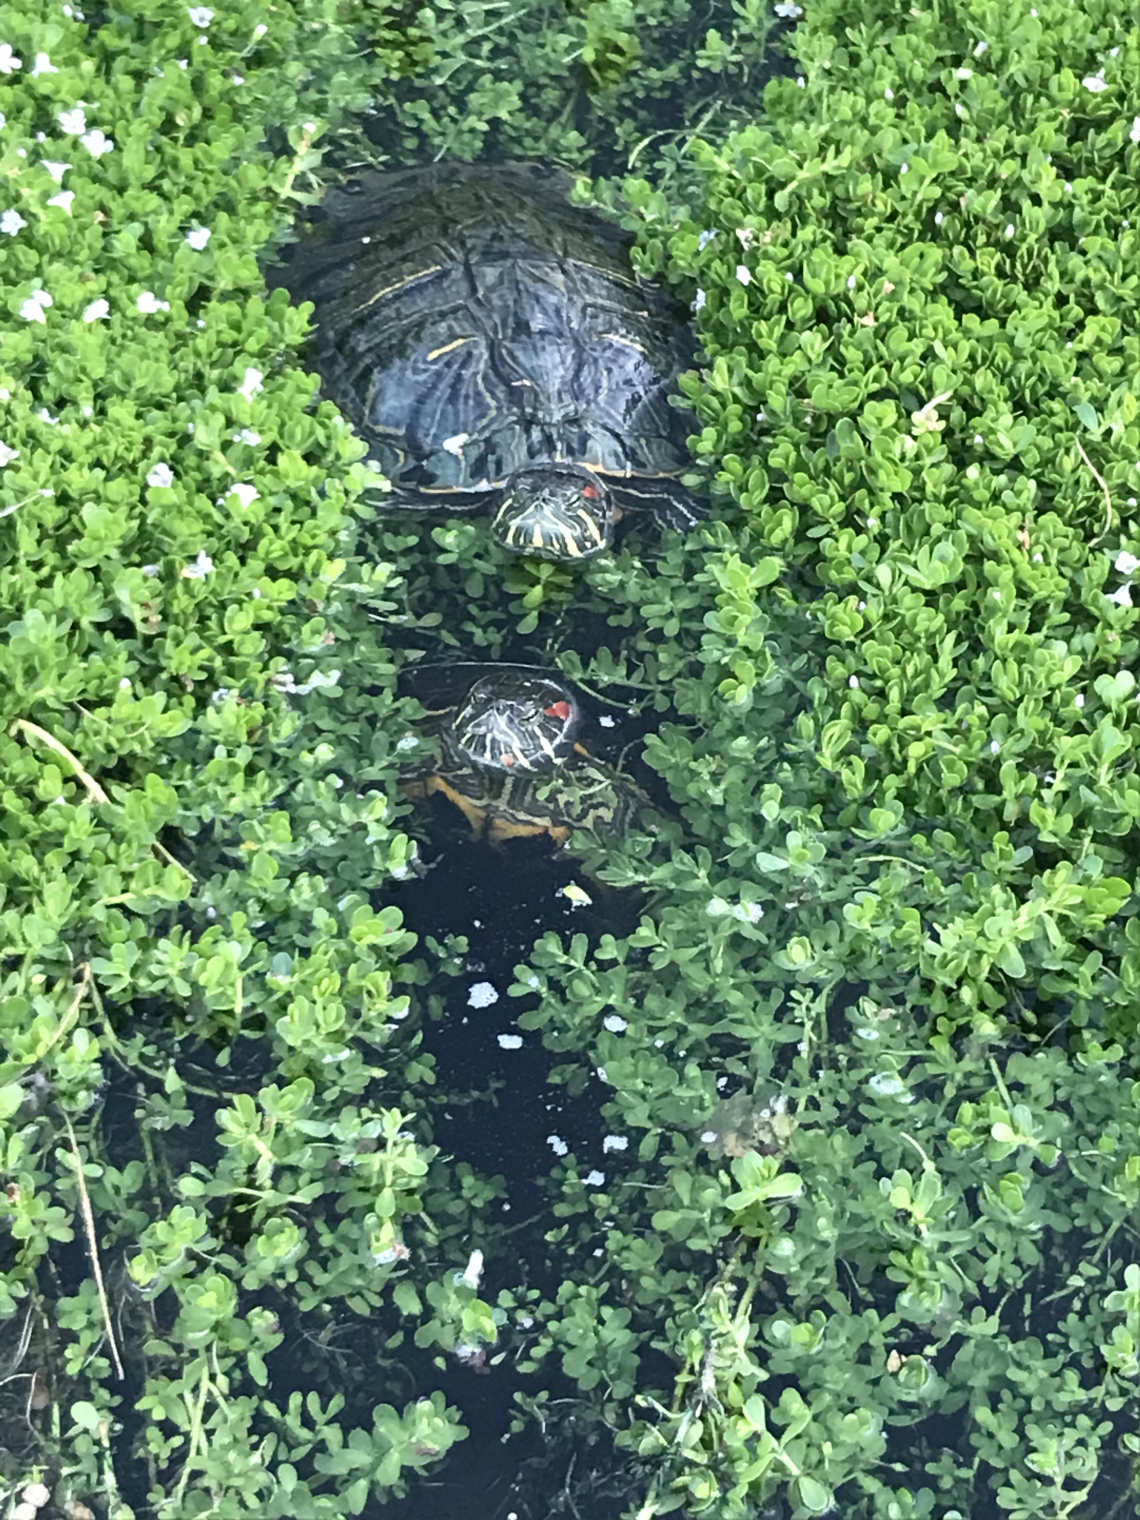 Jael Walker photo showing a turtle creating a path through some leafy green plants